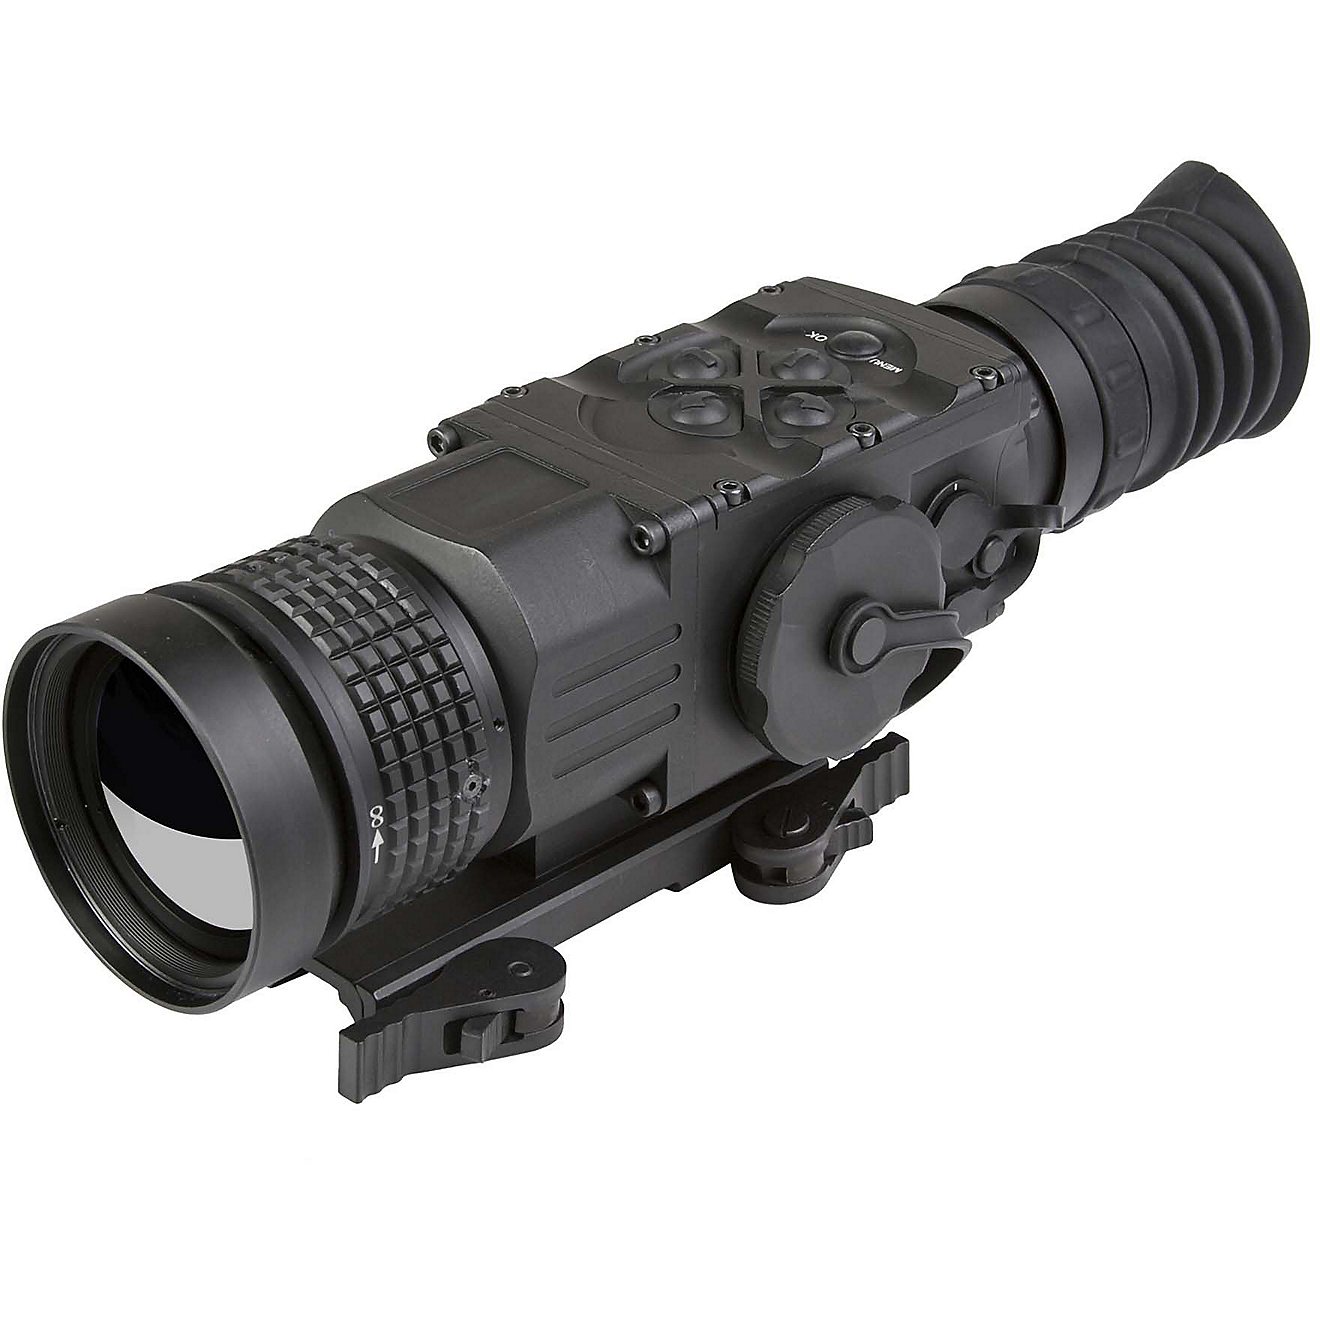 AGM Global Vision Python TS50-640 2 x 50 Thermal Imaging Riflescope                                                              - view number 1